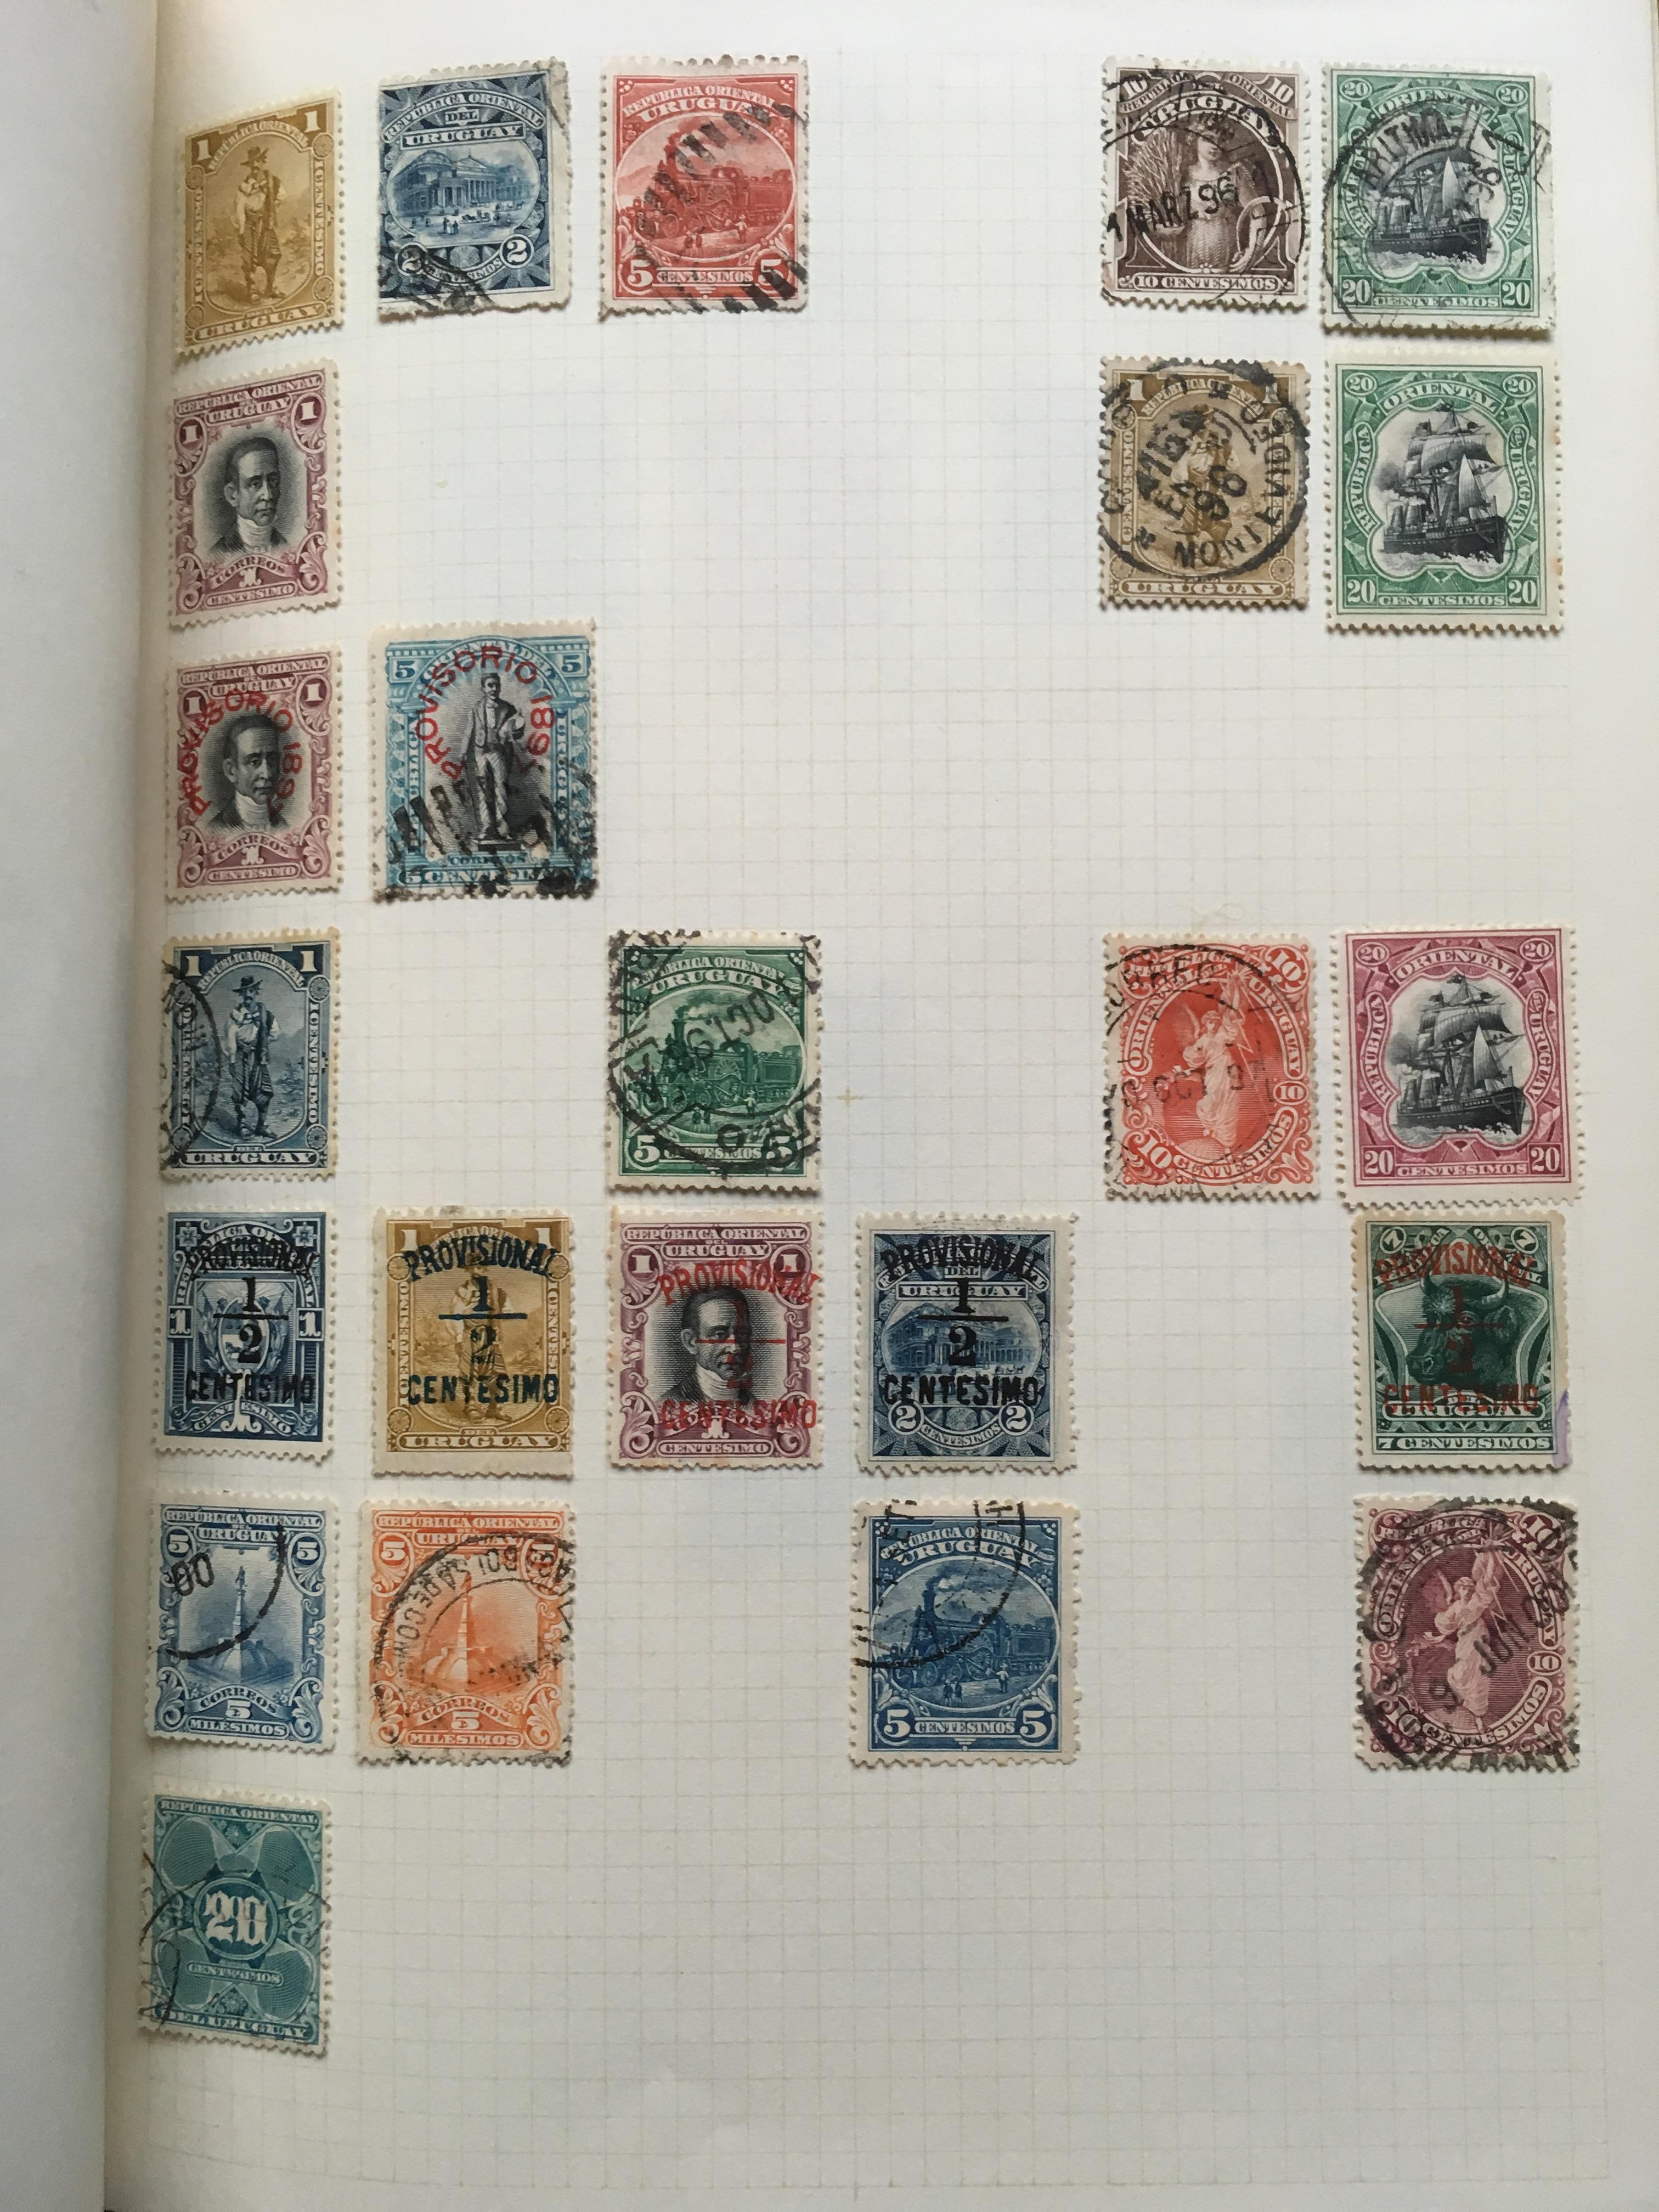 TWO ALBUMS WITH COLLECTIONS OF EUROPE AND LATIN AMERICA WITH HAITI, PERU, VENEZUELA, - Image 10 of 27